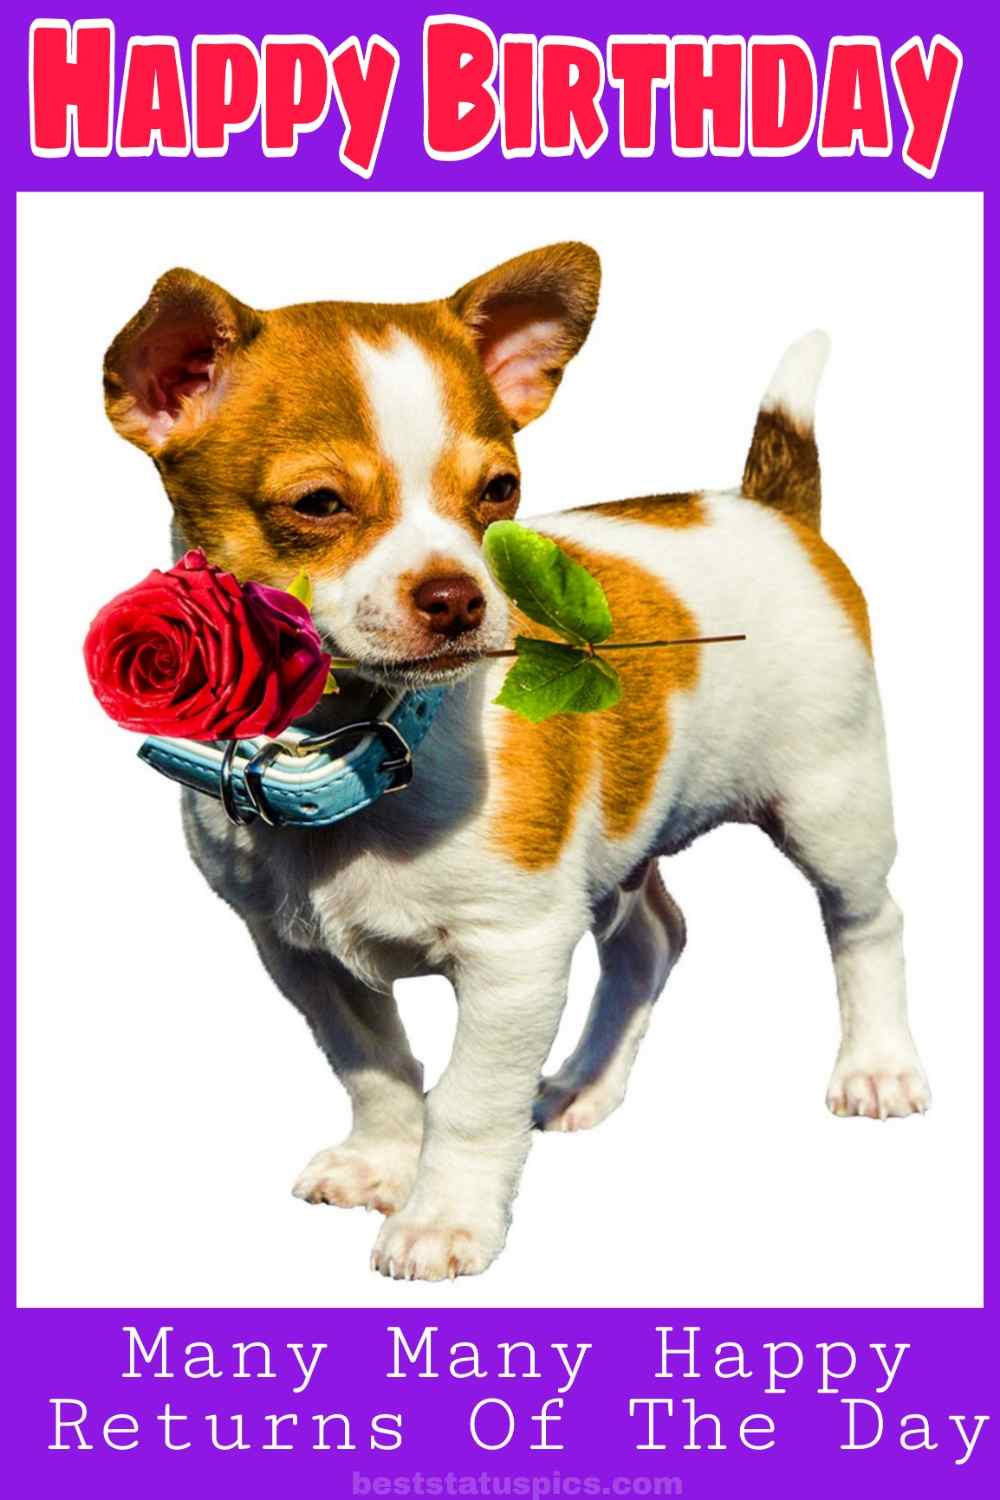 happy birthday picture with cute puppy and rose for girlfriend or her